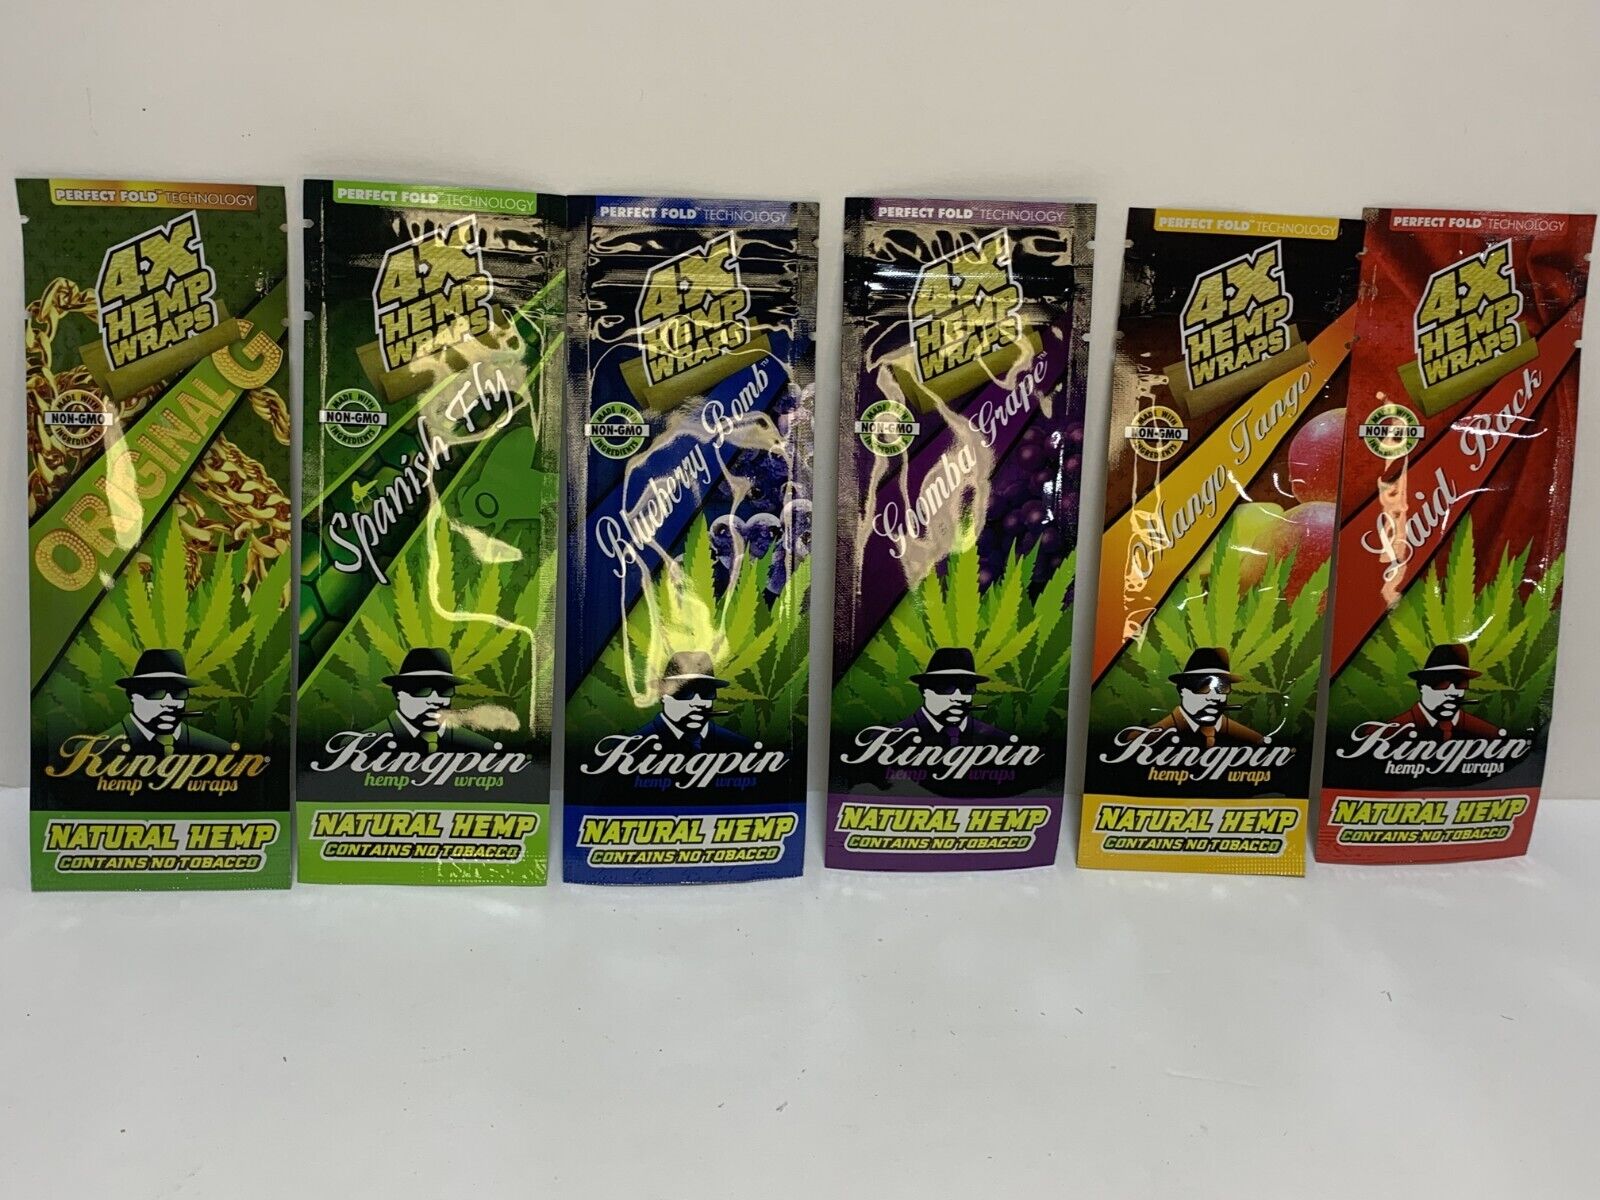 KINGPIN HERBAL WRAPS - 6 Pack Sampler - all Flavors/ 4 toasted wraps per pack